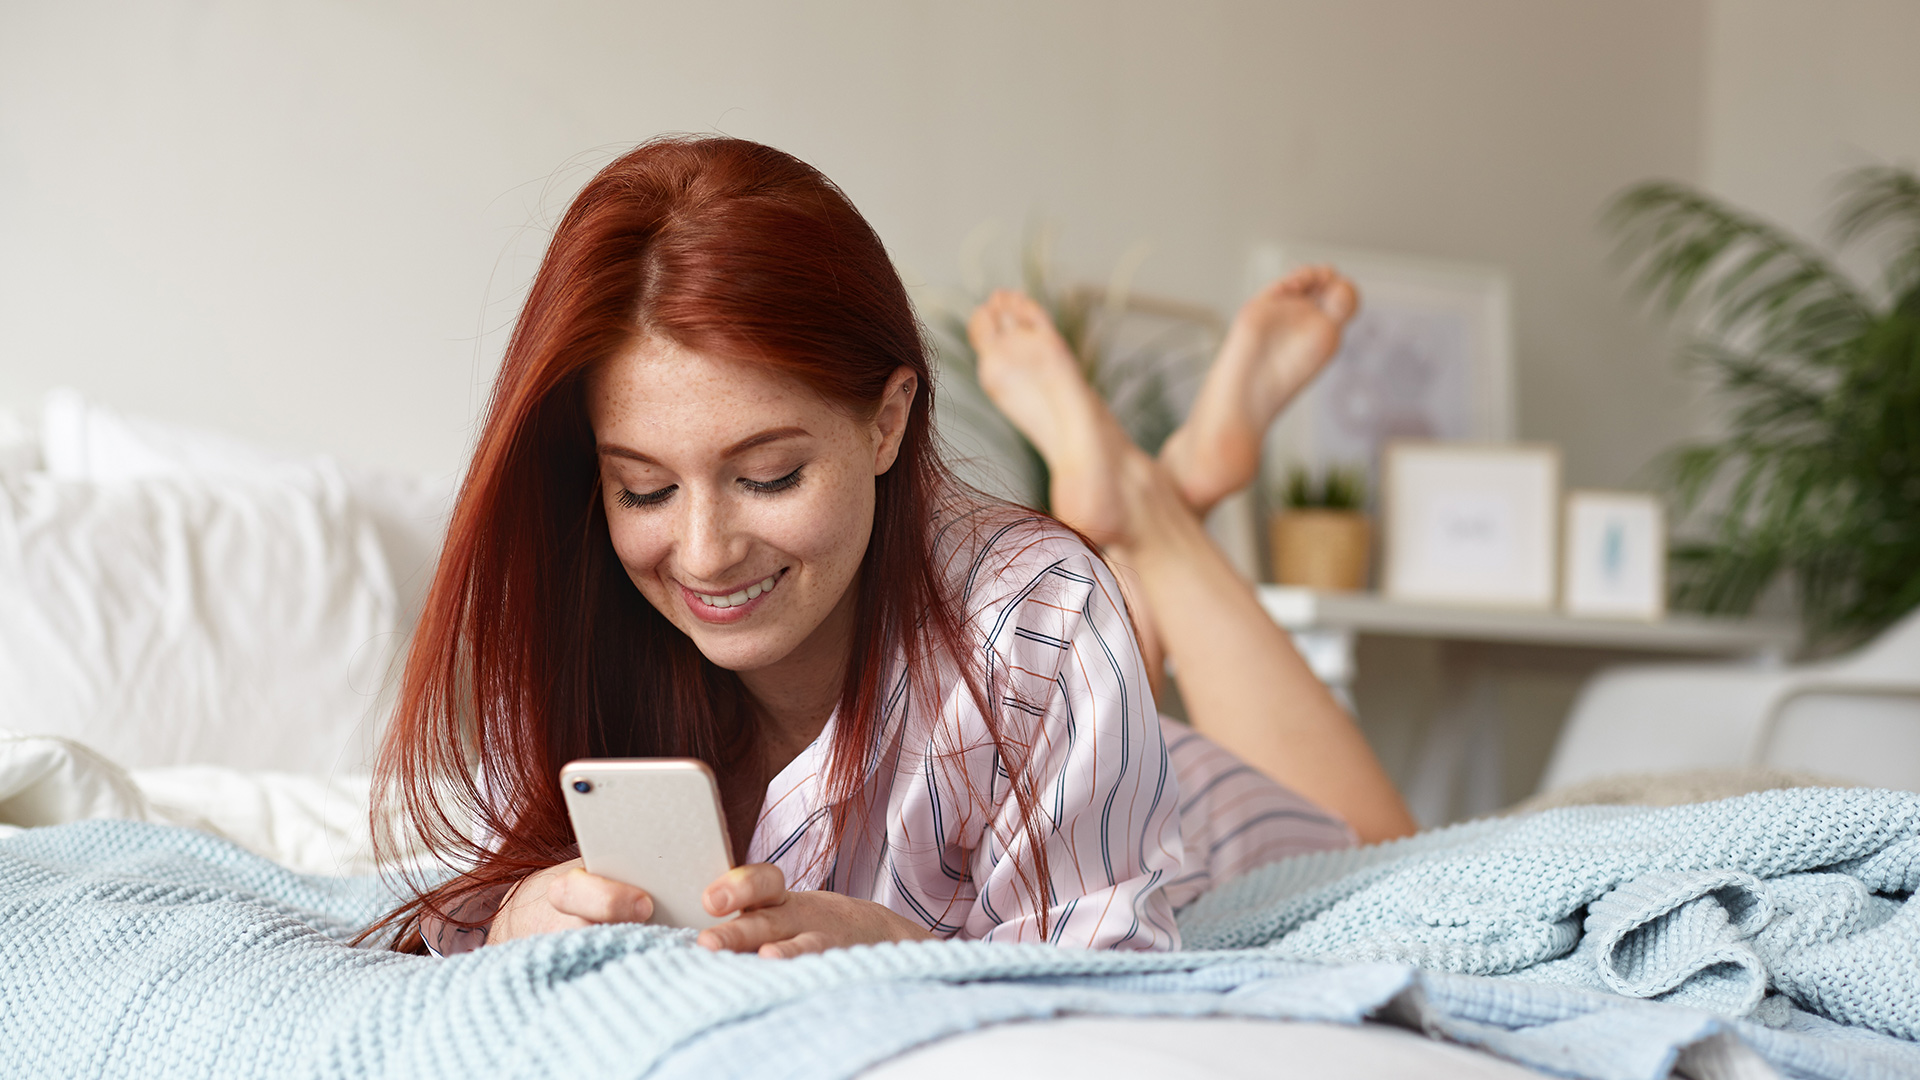 Red-haired woman in her pajamas lying in bed while crossing her legs behind her. She is looking at her phone and smiling.